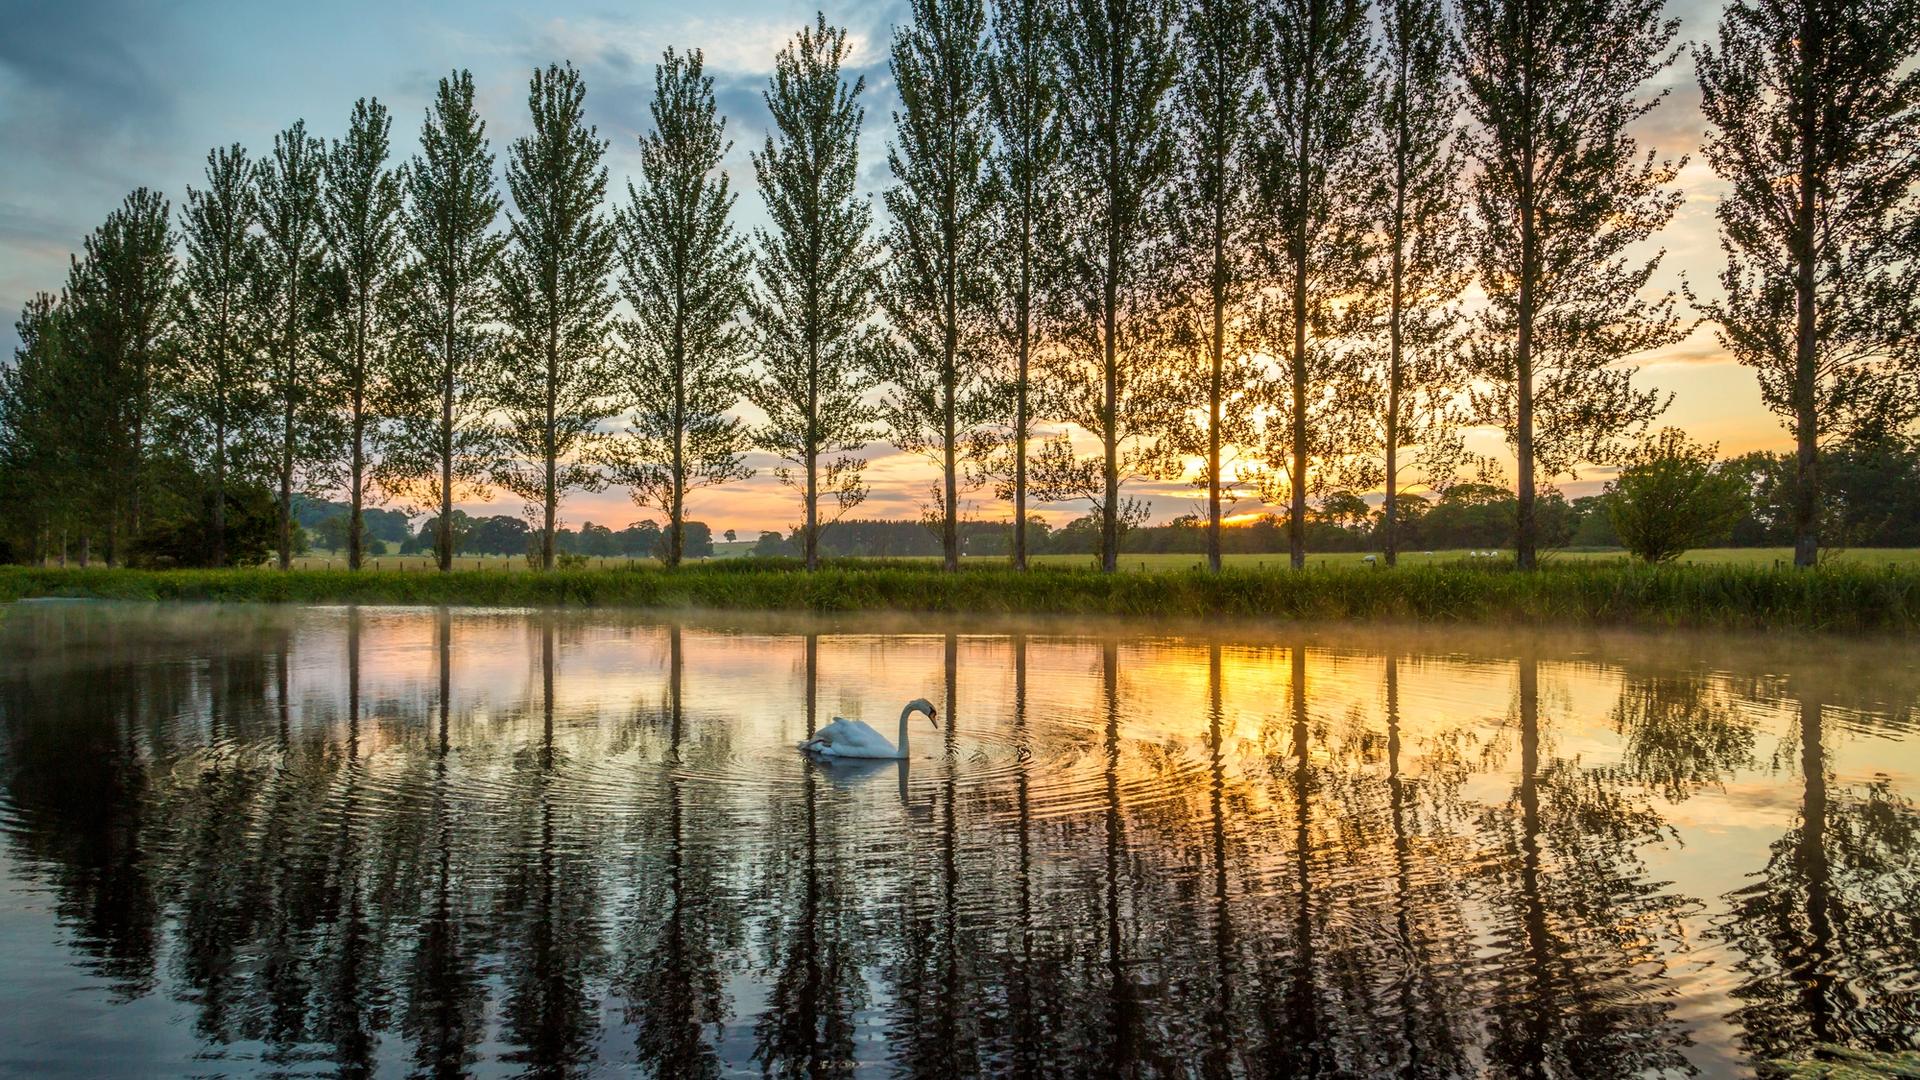 Photo of a swan in a lake at sunset by MichaelConrad34 @ Dreamstime